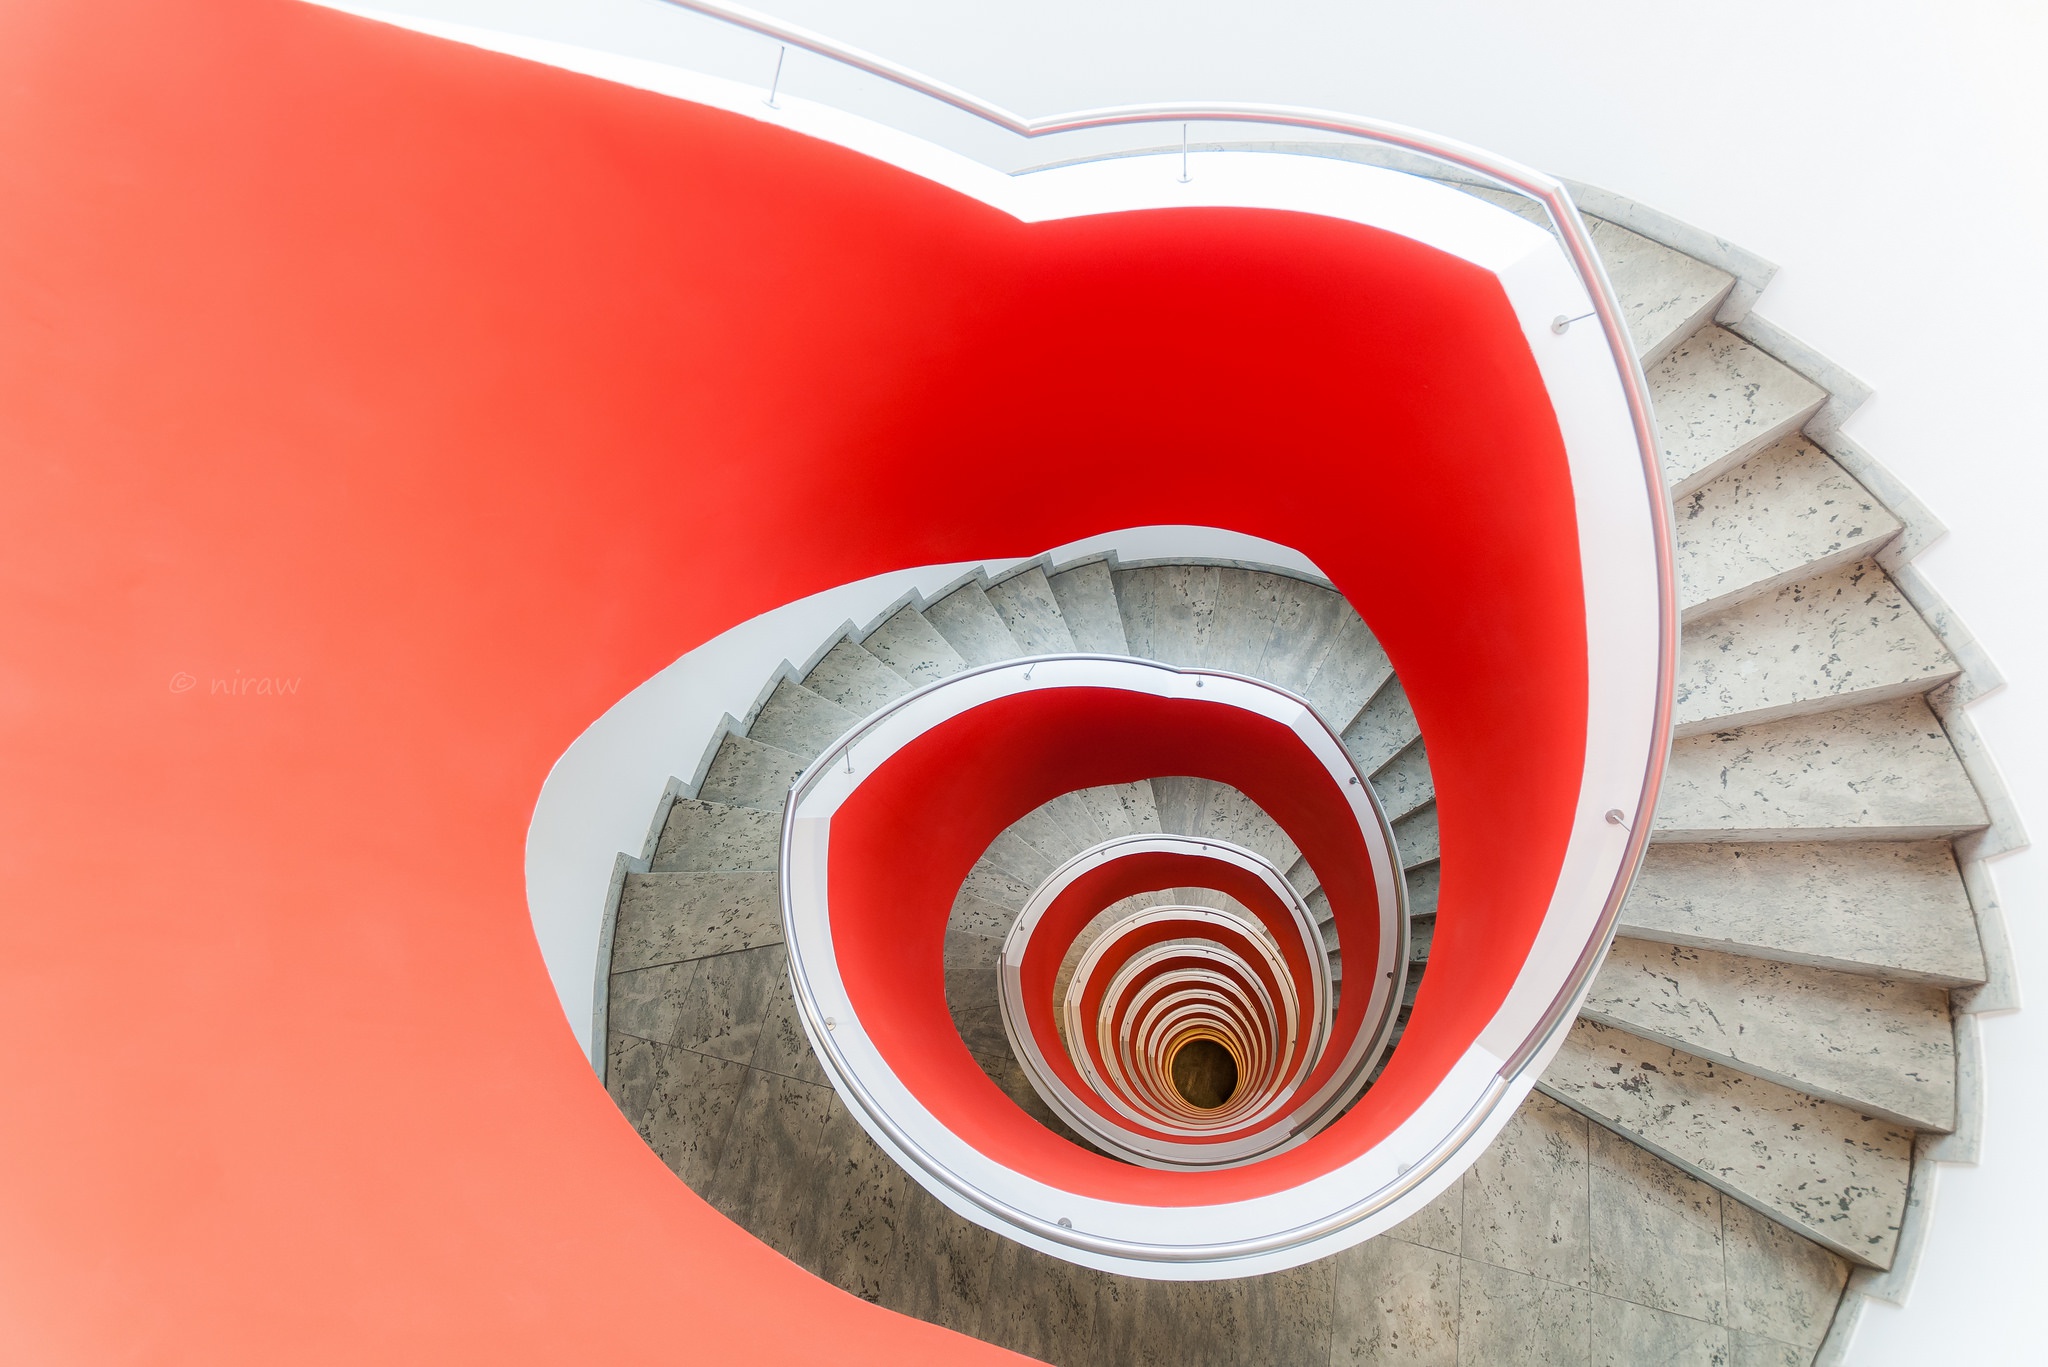 man made, stairs, spiral staircase Full HD